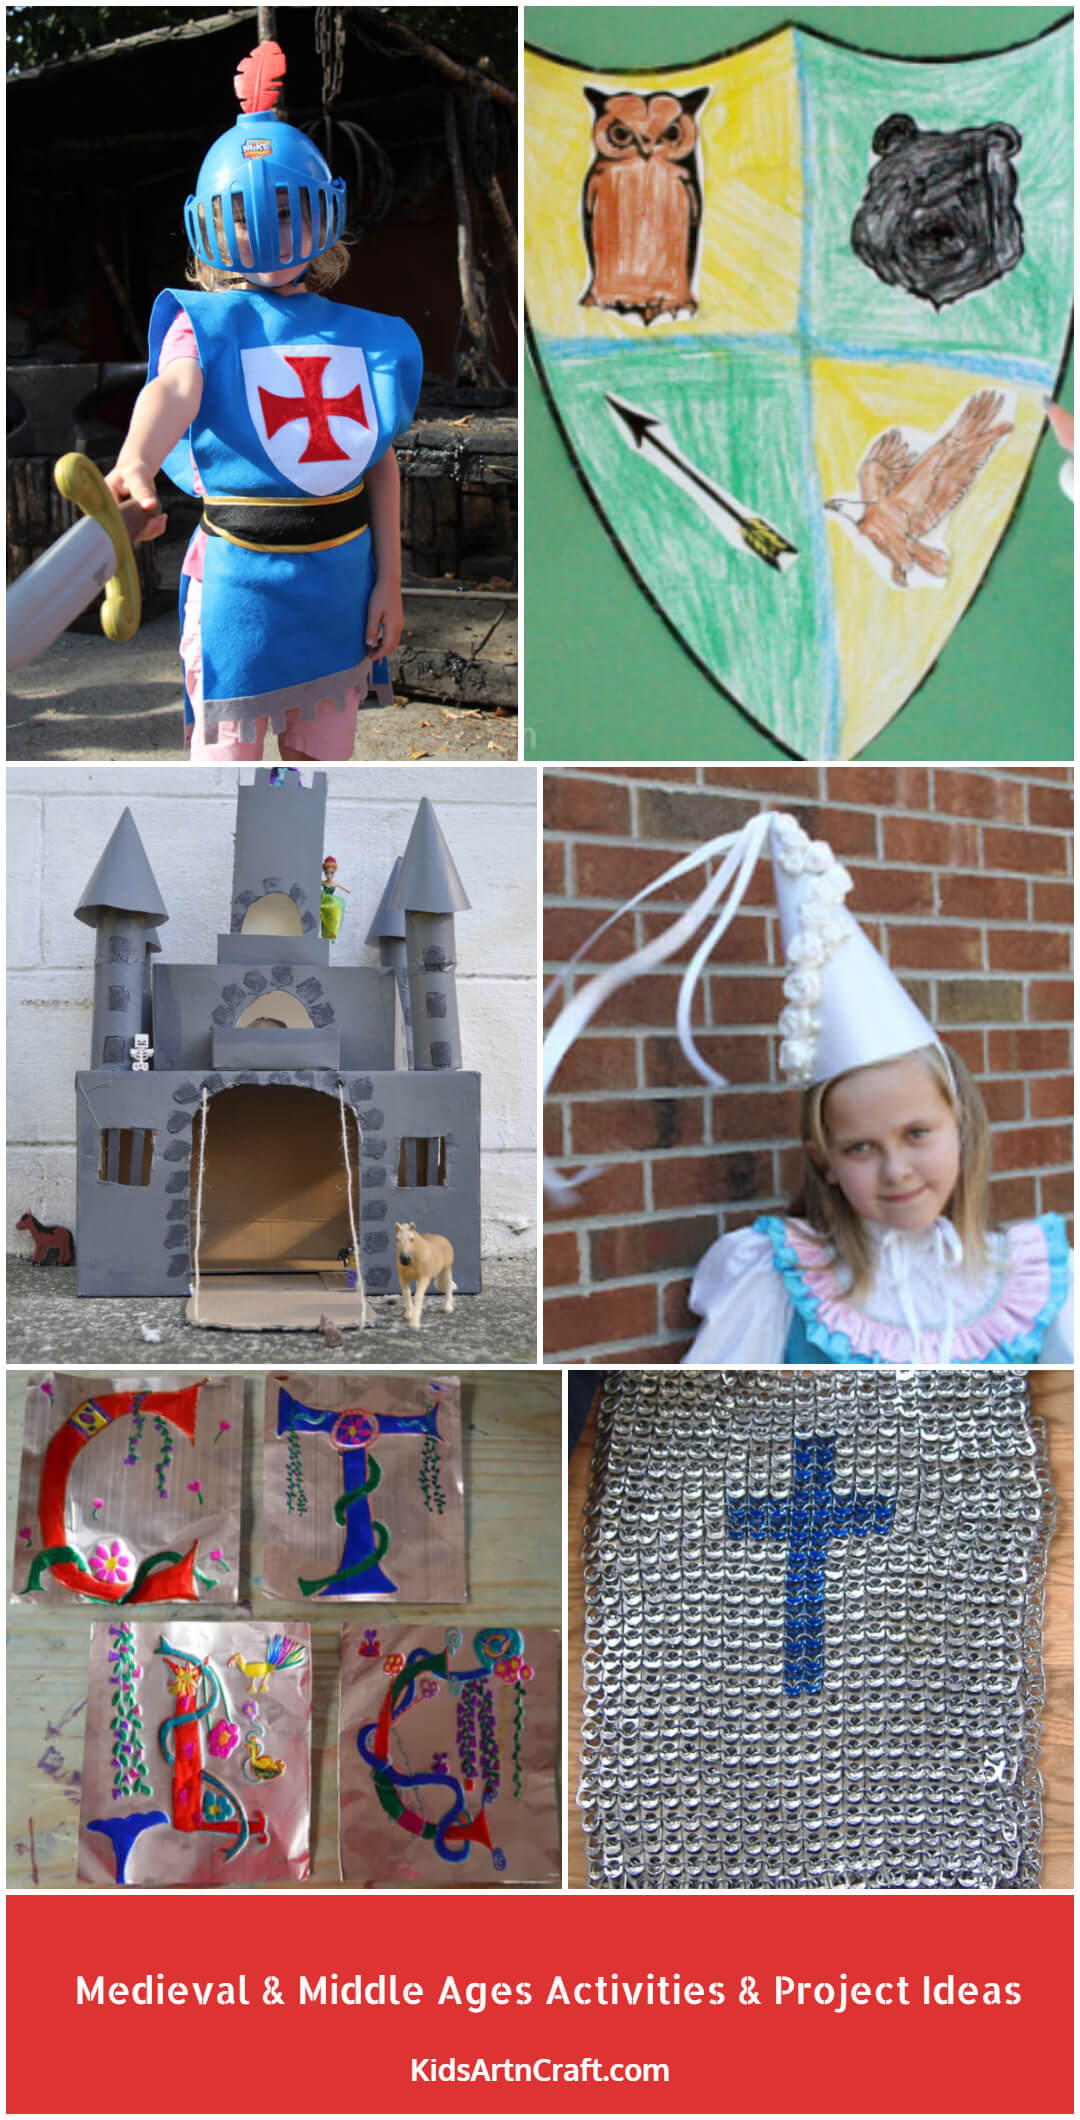 Medieval & Middle Ages Activities & Project Ideas